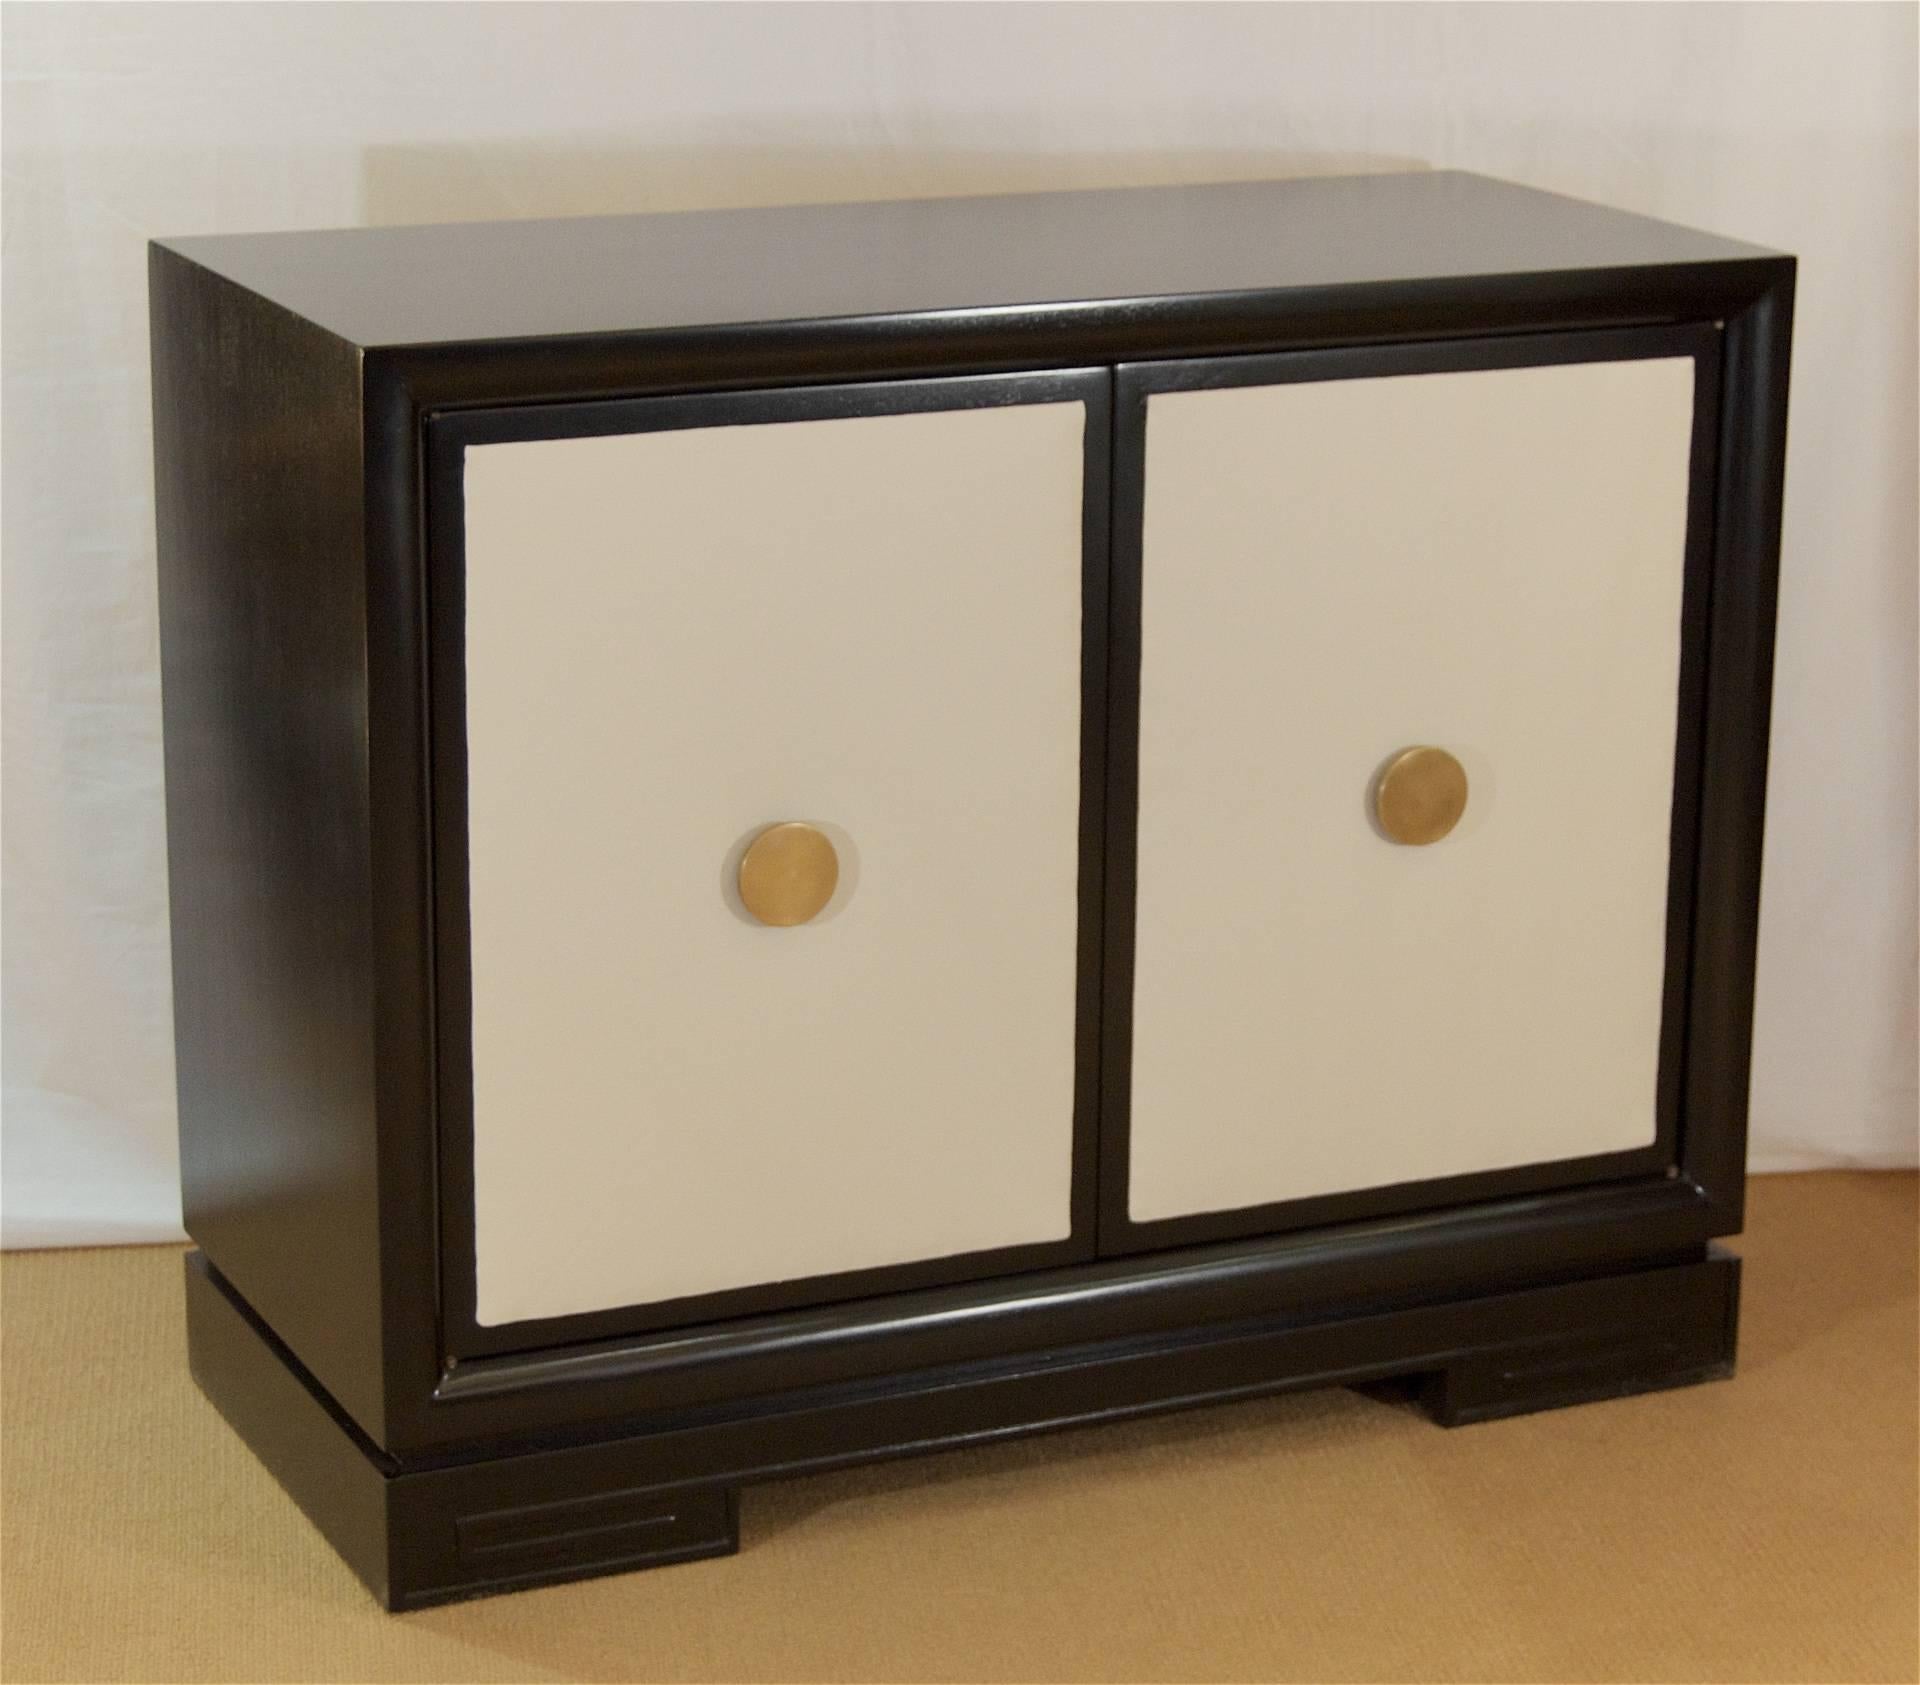 Gorgeous Hollywood Regency chest of drawers in satin black lacquer. The cabinet doors are covered in a cream leather with large, original circular brass pulls. The base of the piece has a subtle Greek key accent. Five interior drawers for a